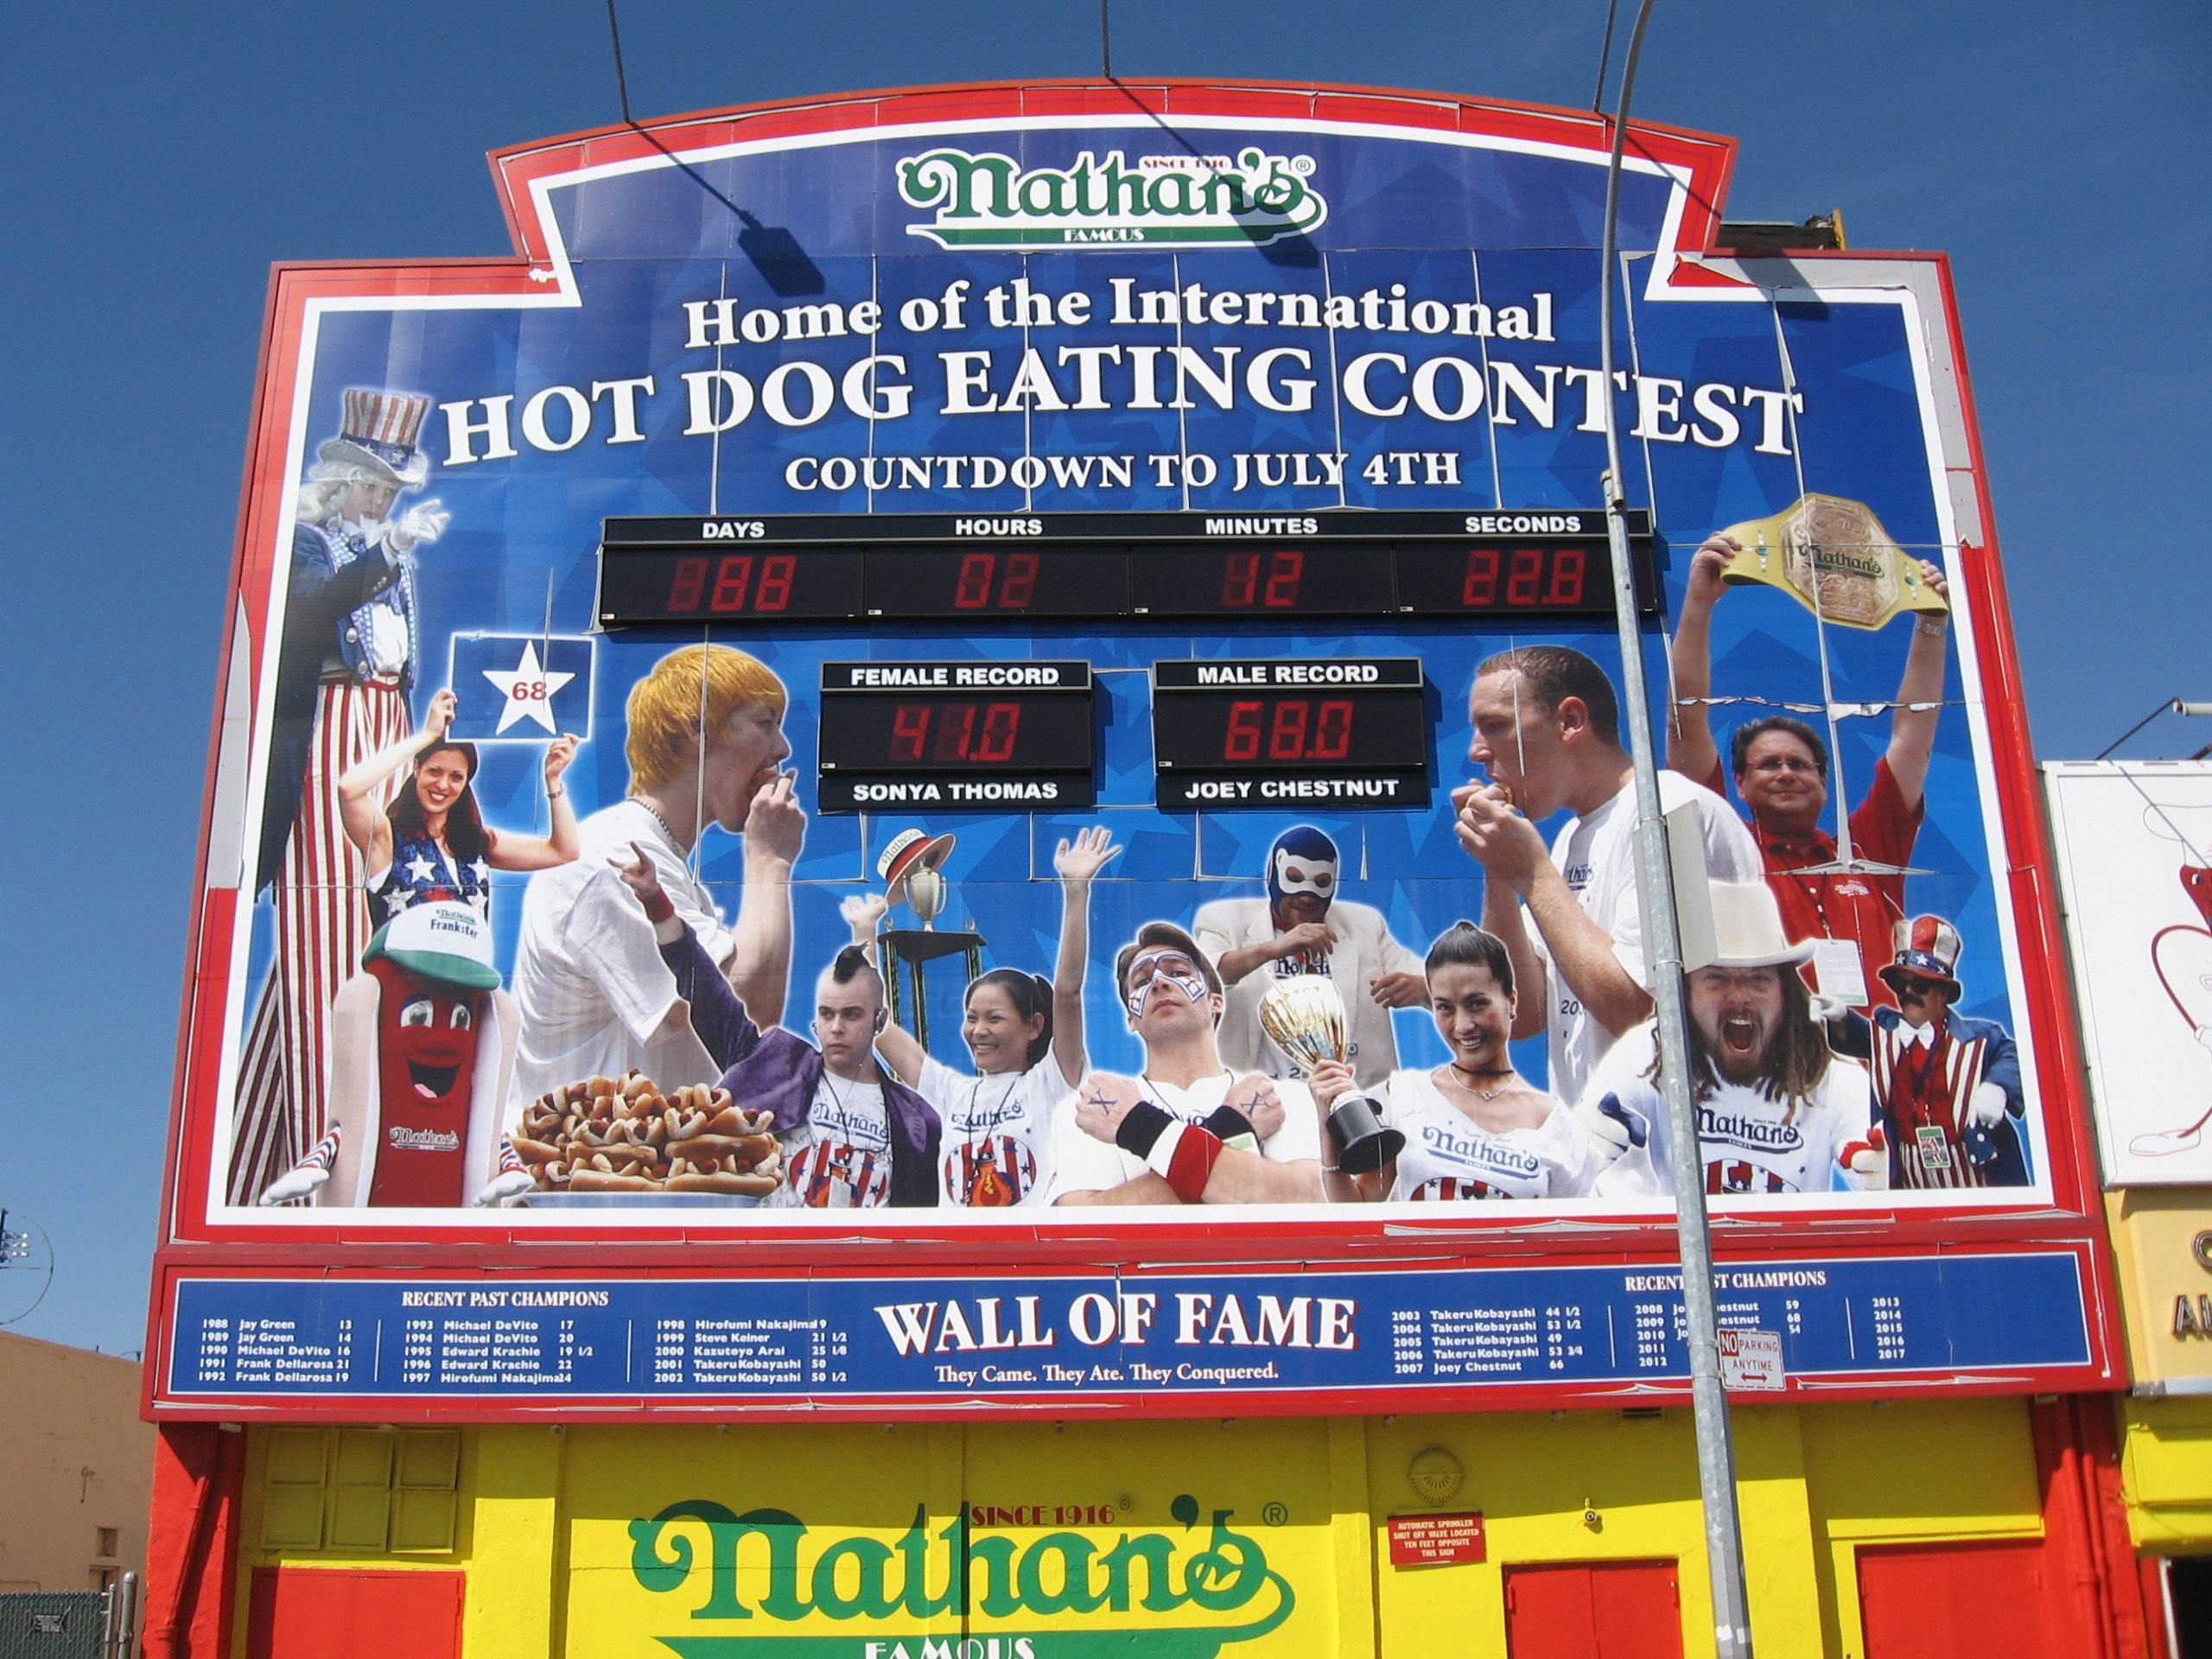 nathans hot dog eating contest sign 